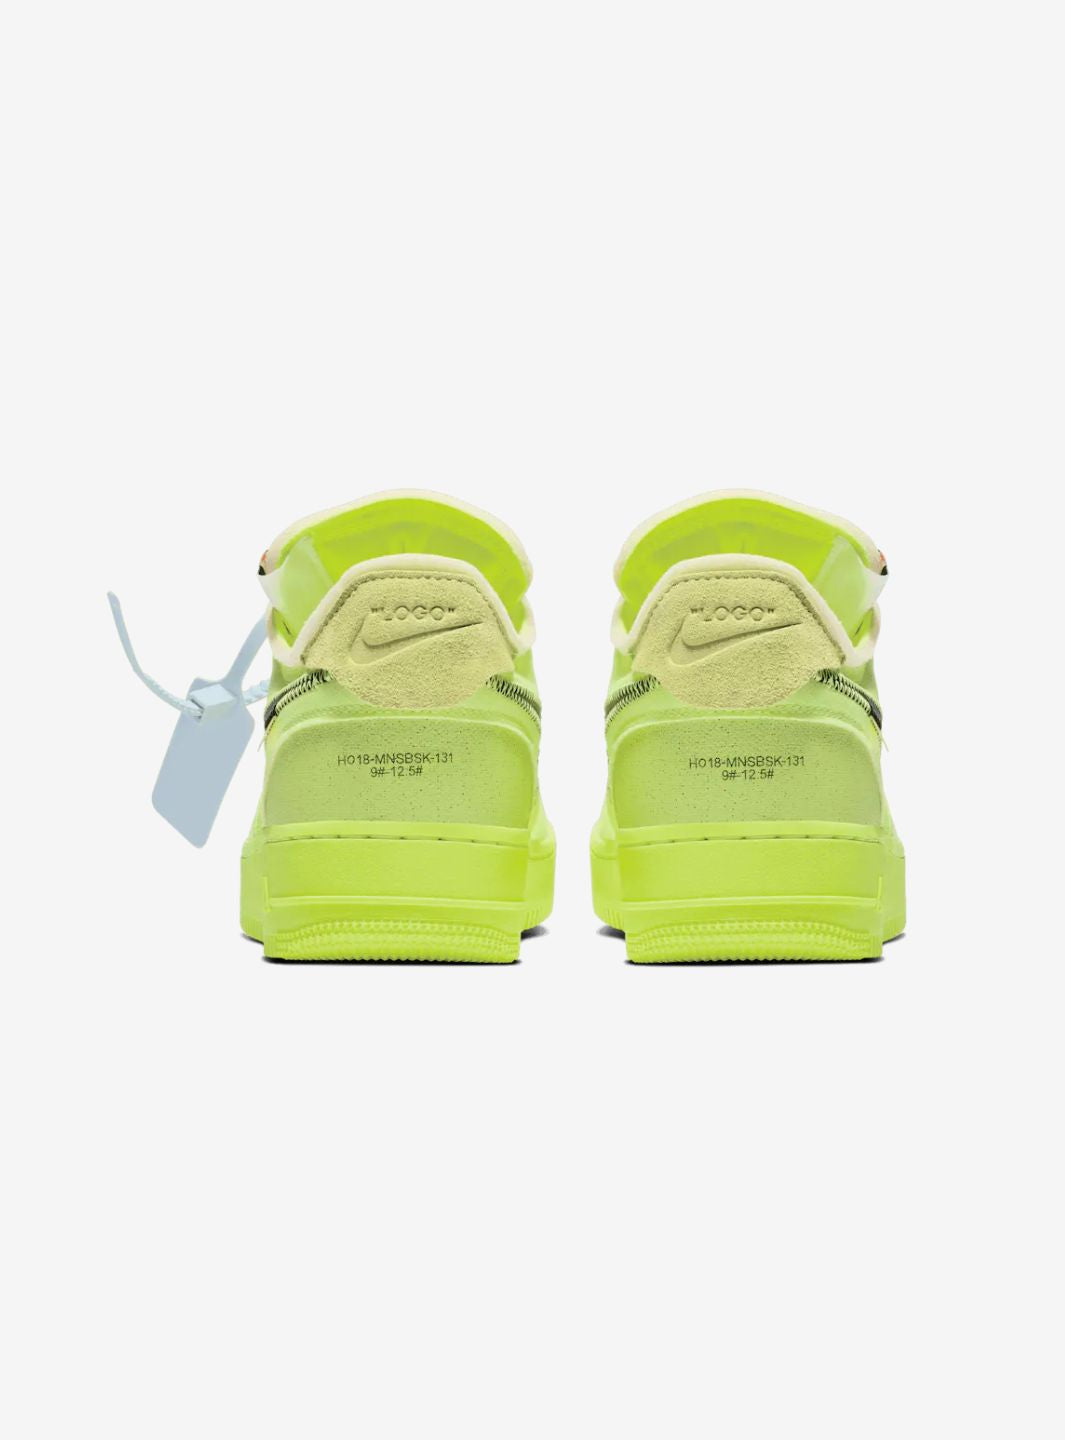 Nike Air Force 1 Low Off-White Volt - AO4606-700 | ResellZone